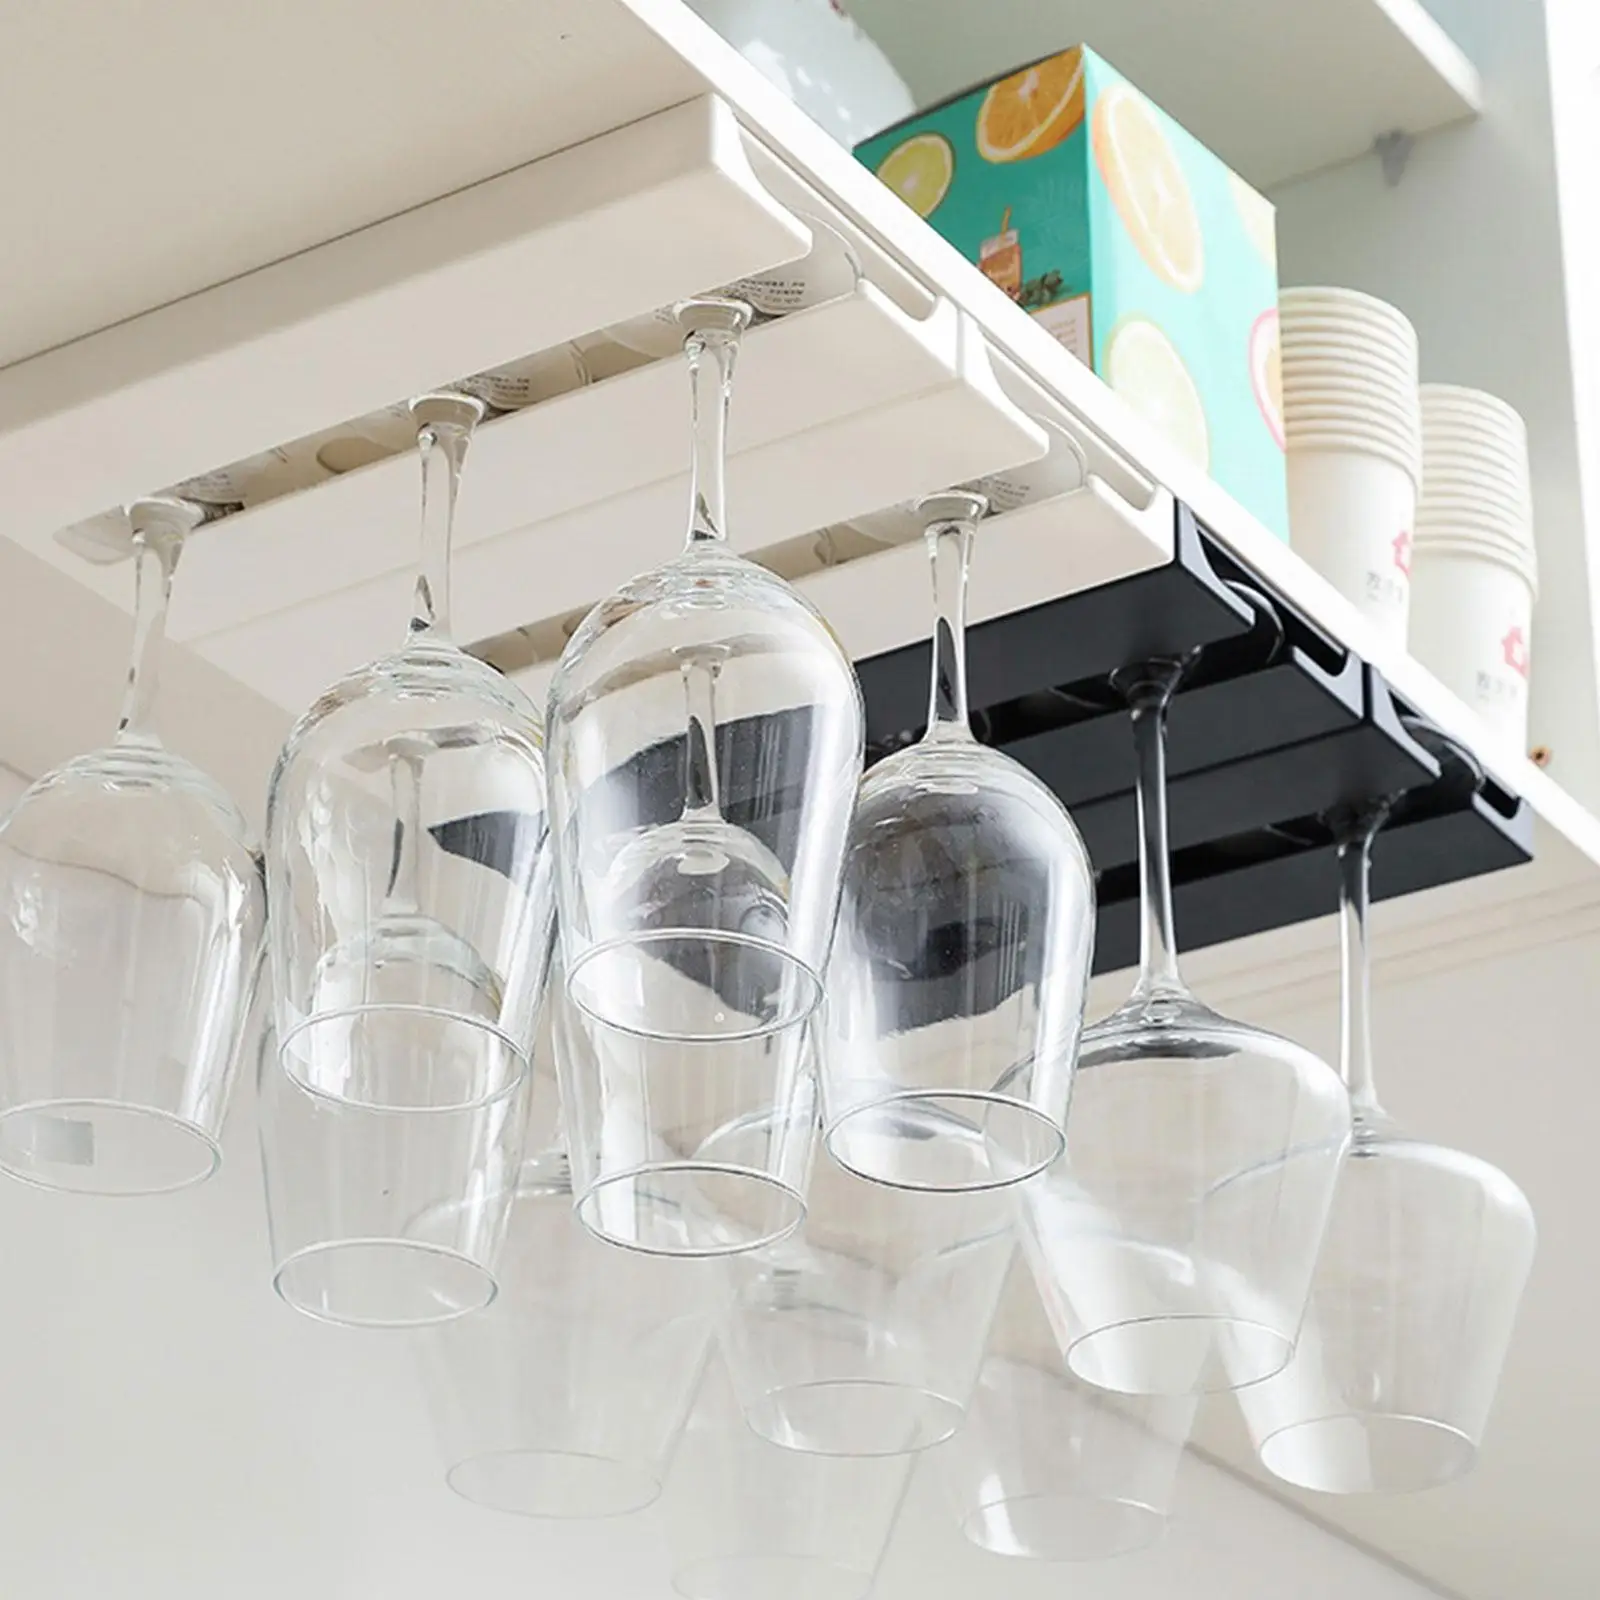 

Kitchen Accessories Wall Mount Wine Glasses Holder Organizer Stemware Classification Hanging Rack Cup Glass Cupboard Punch- J0h1